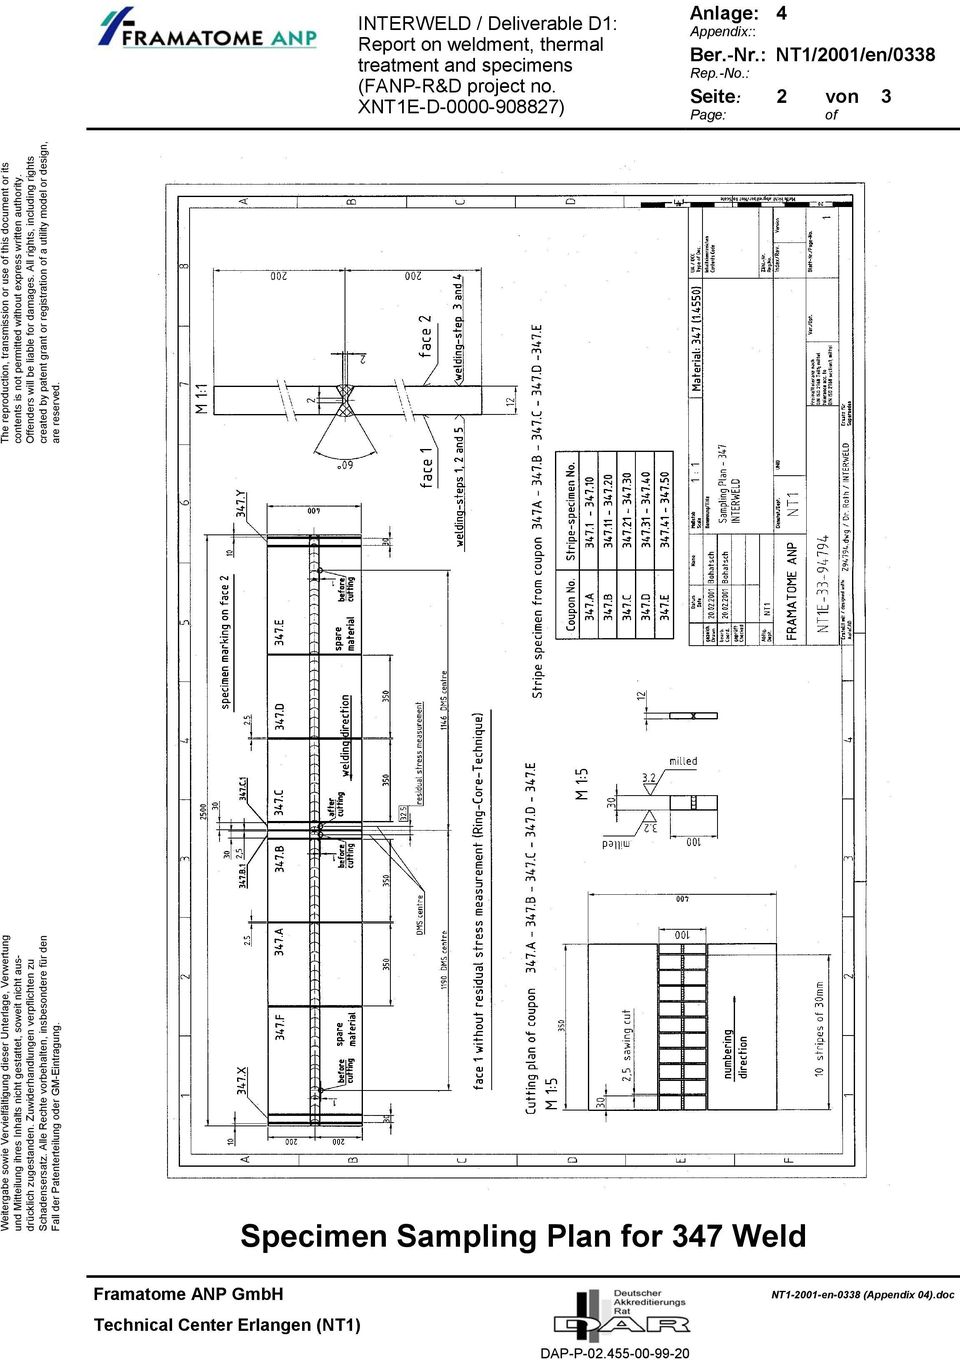 Plan for 347 Weld